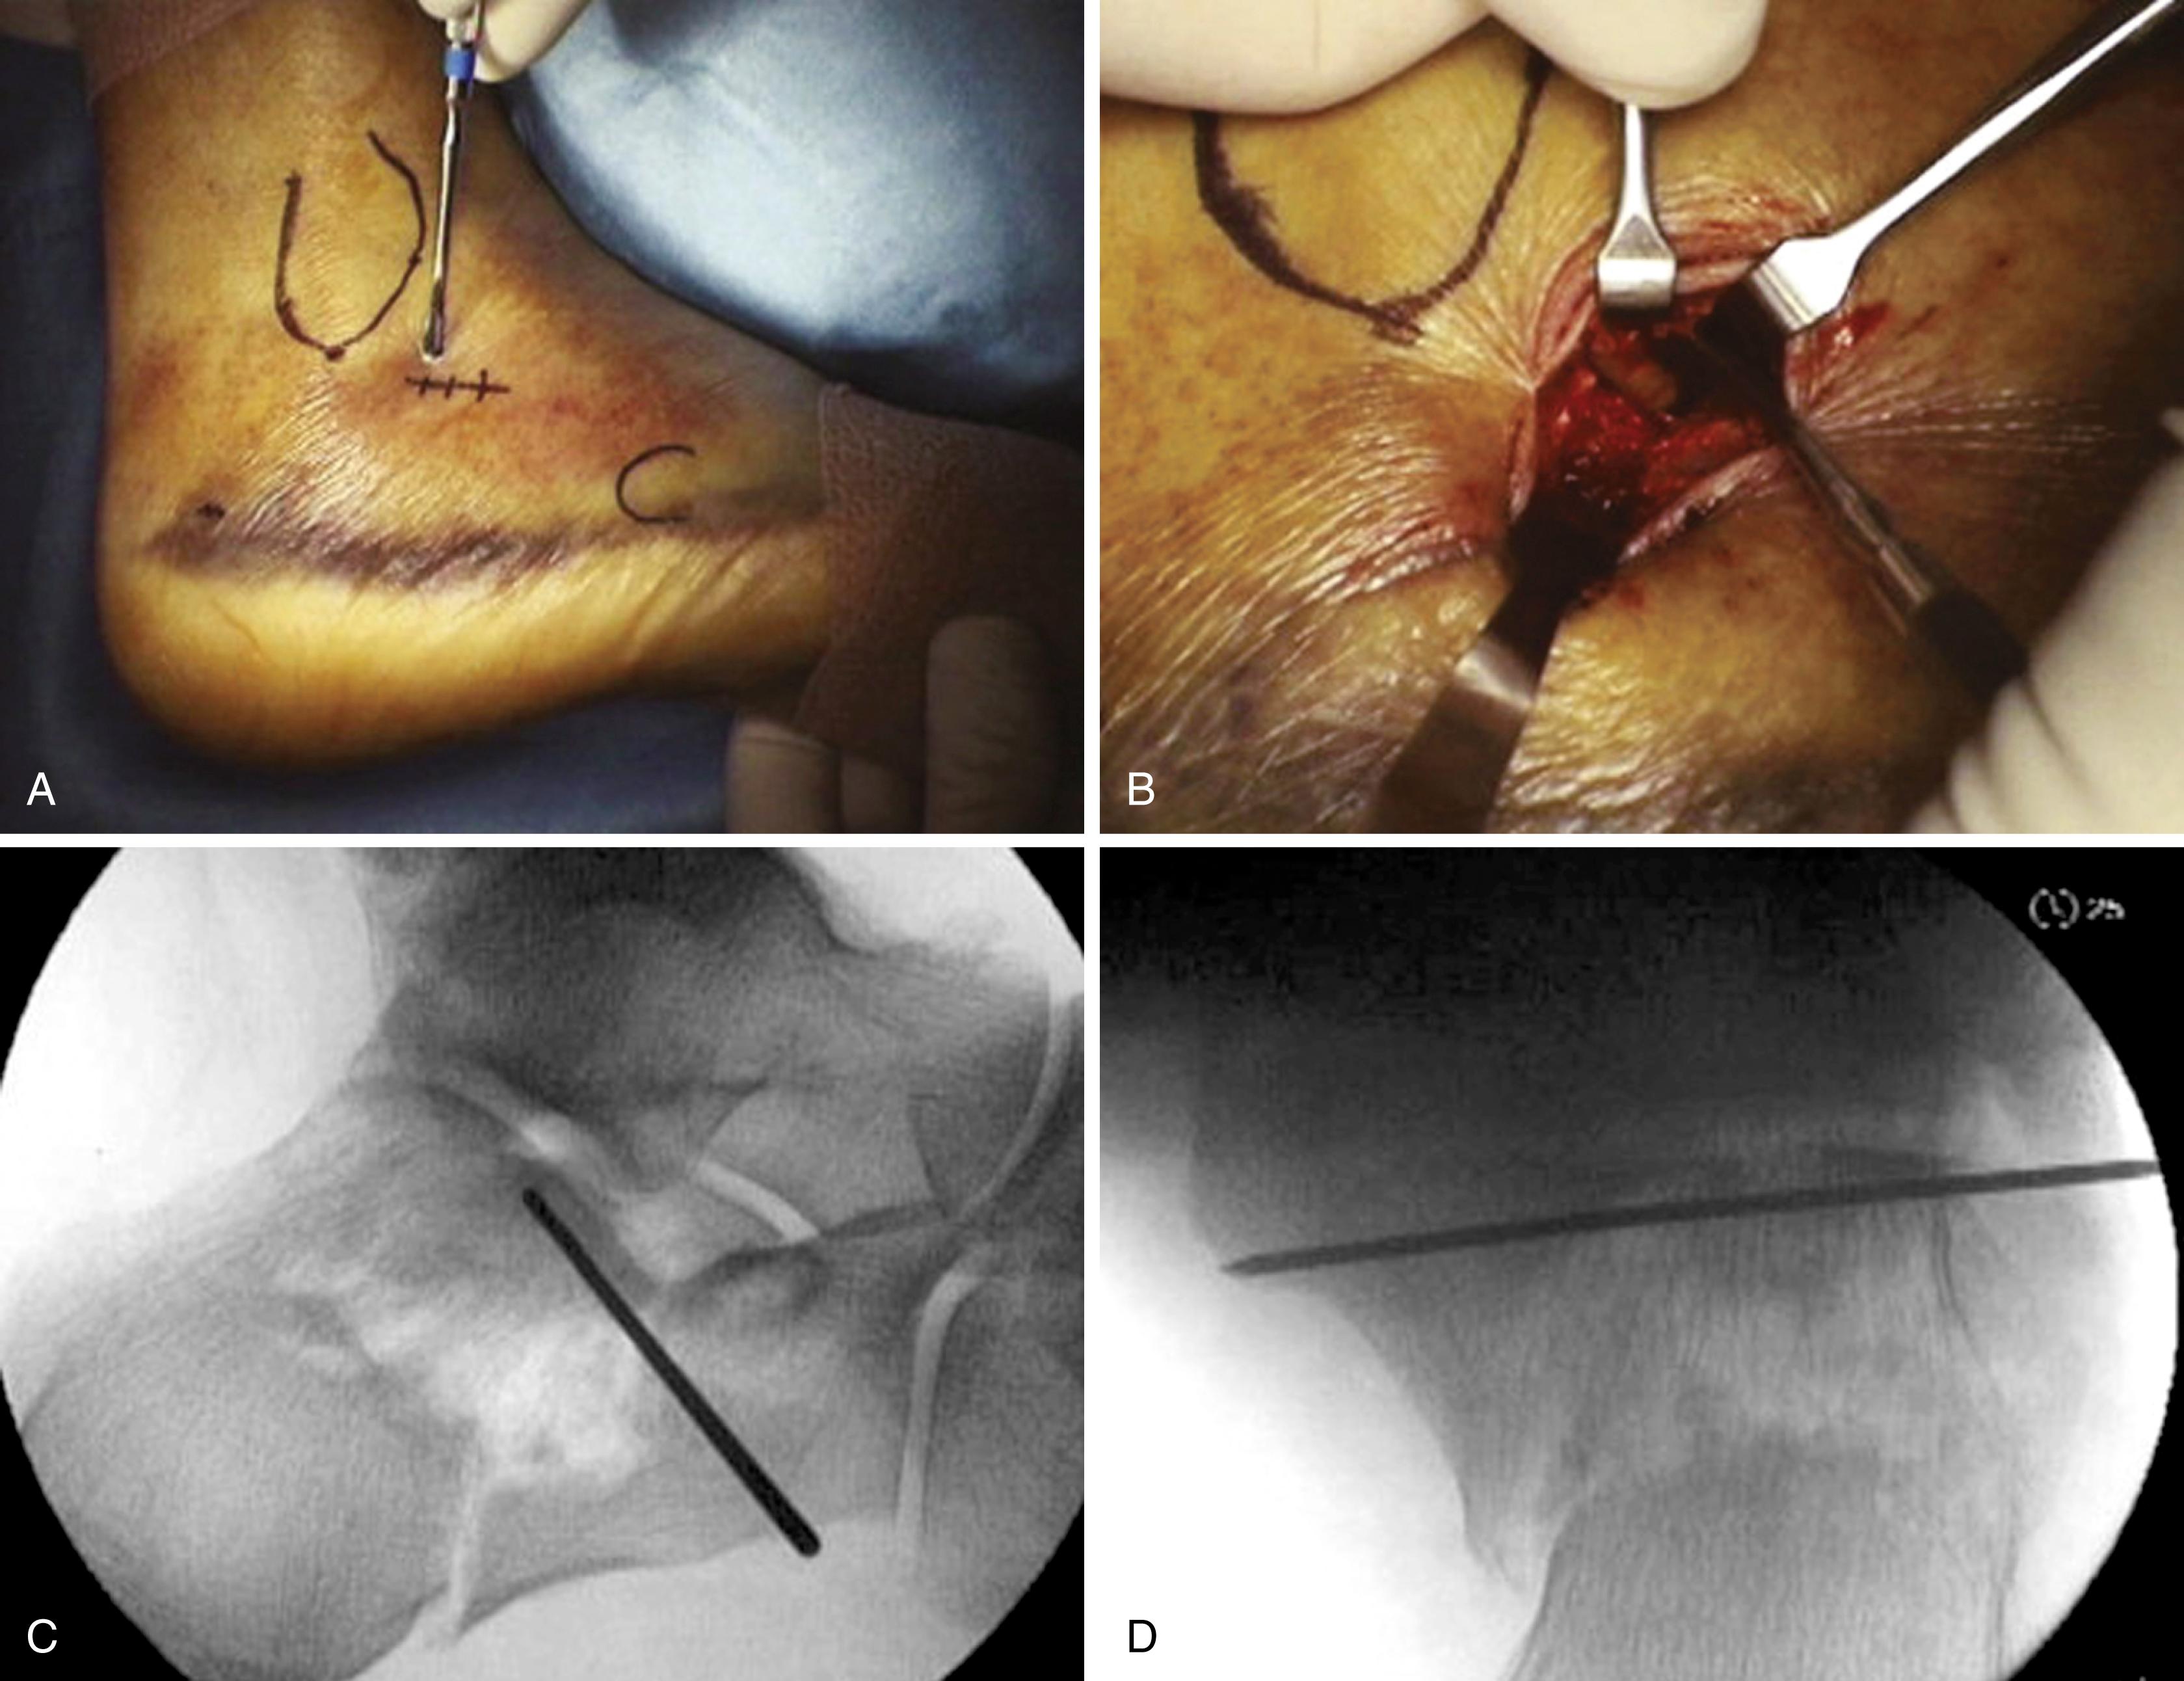 FIGURE 89.11, Percutaneous reduction and fixation of calcaneal fracture (see text). A and B, Posterior facet is reduced through small stab incision. C to F, Provisional fixation with Kirschner wires. G and H, Definitive fixation with cannulated screws. I, Skin incision after reduction and fixation. SEE TECHNIQUES 89.3 AND 89.5.